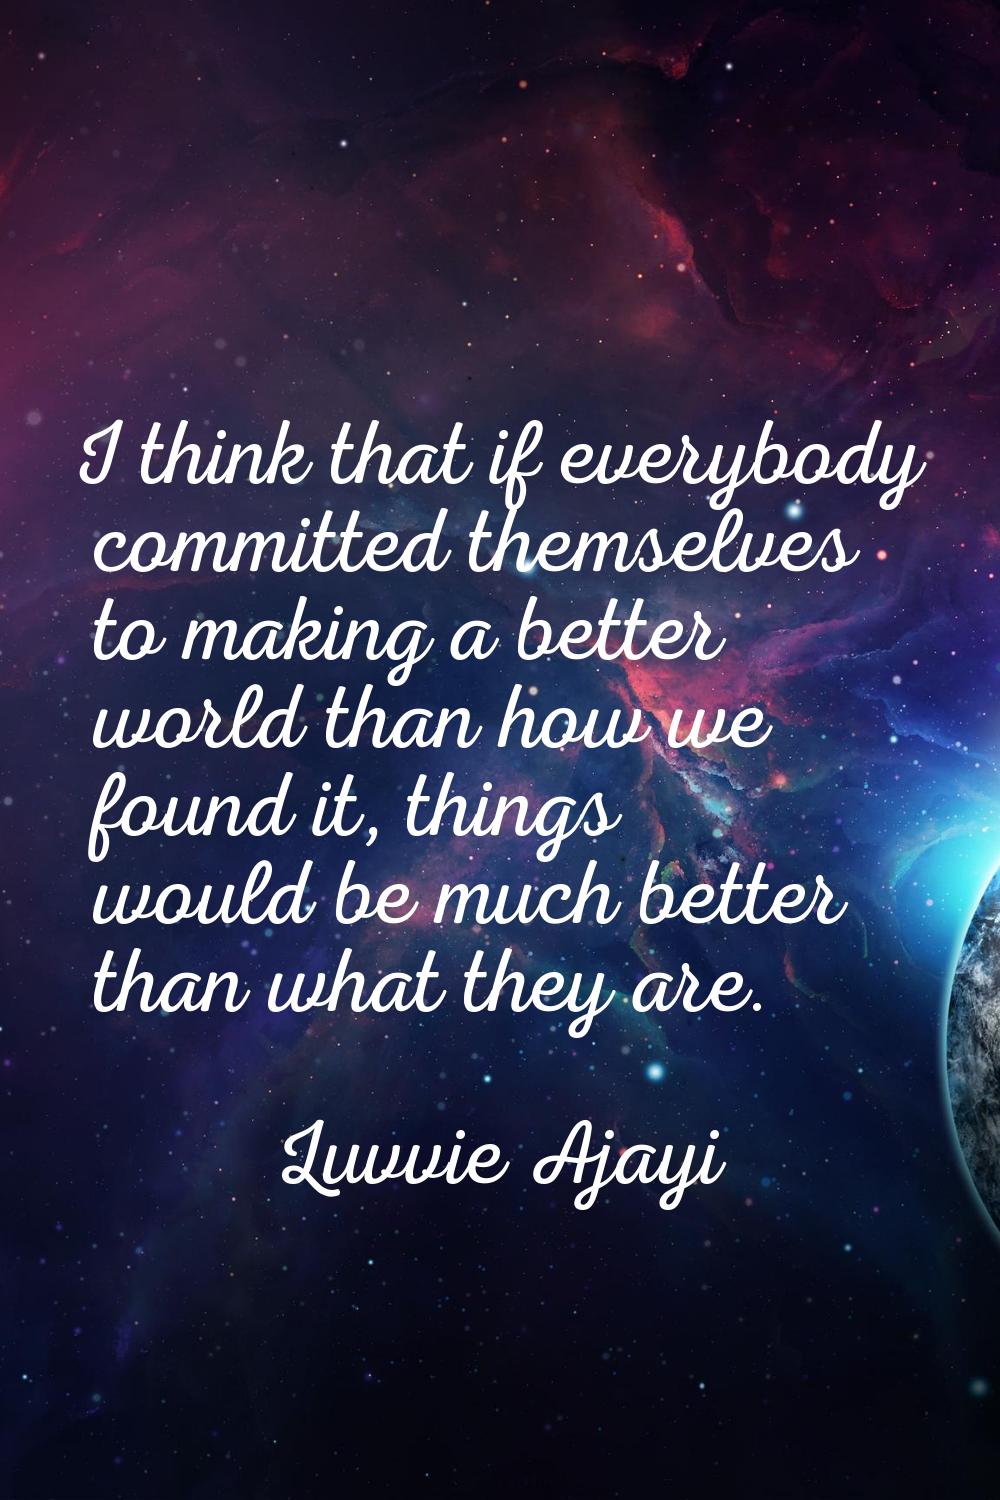 I think that if everybody committed themselves to making a better world than how we found it, thing